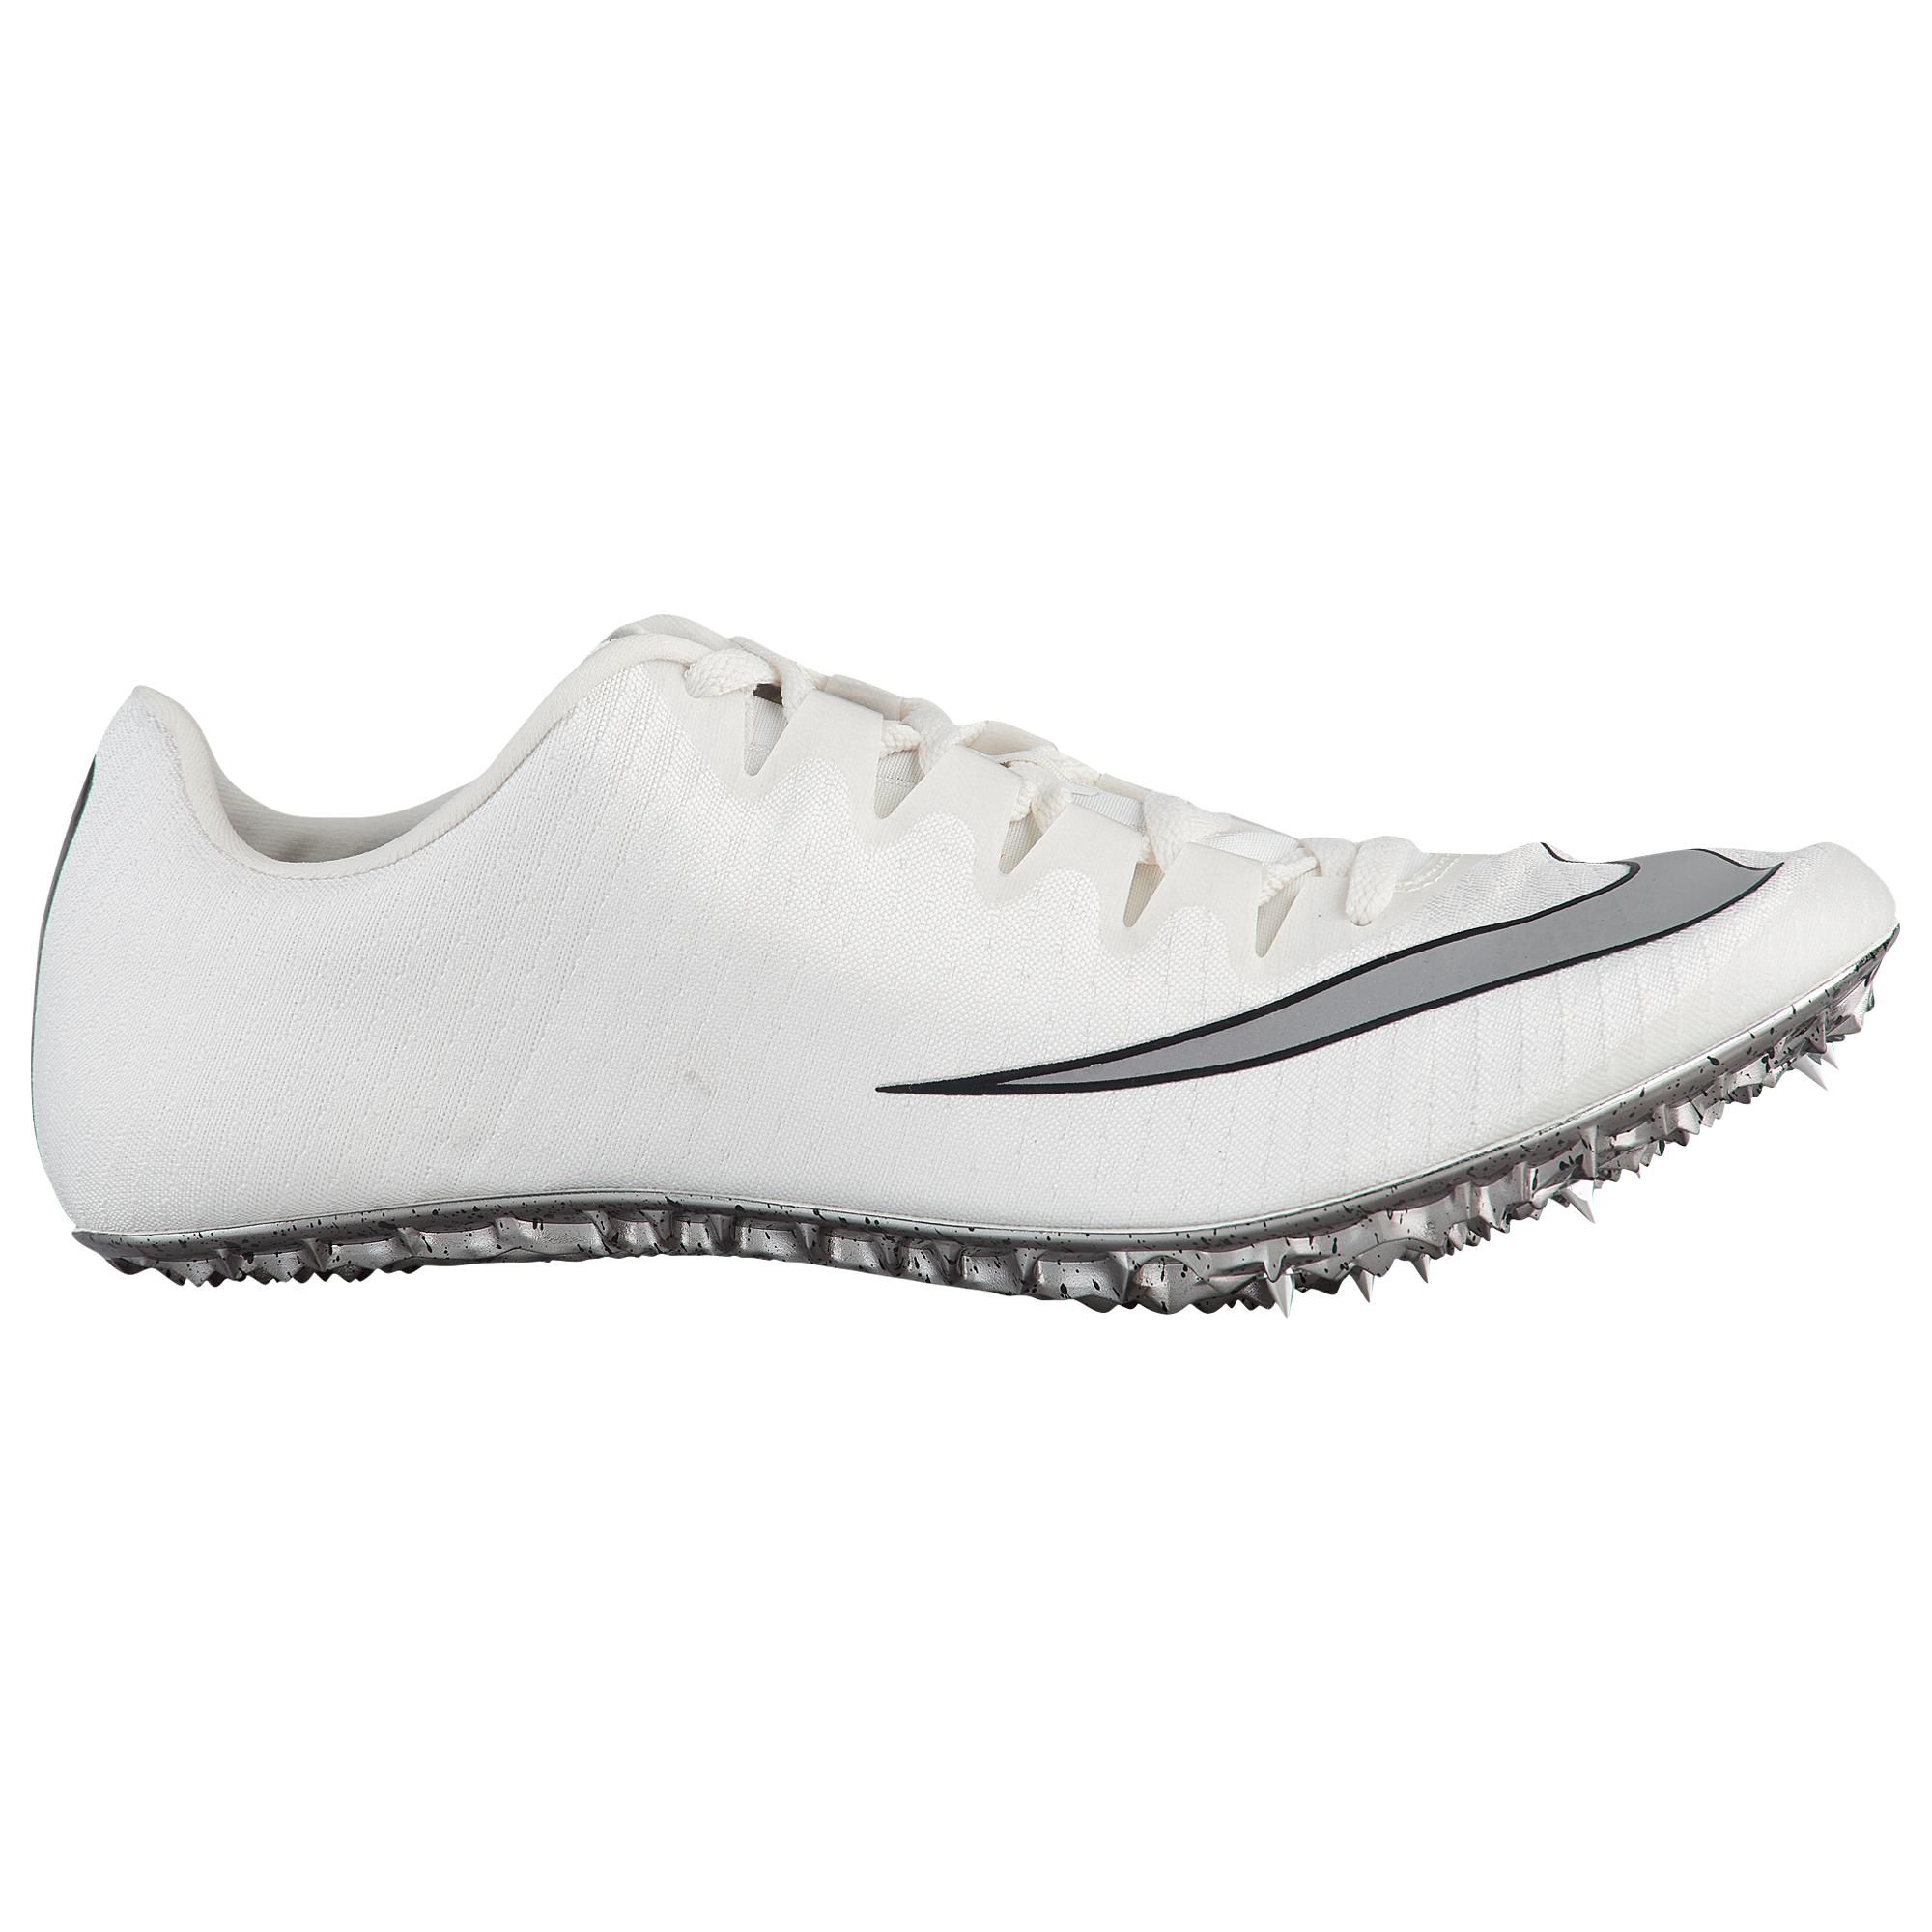 Spikes Superfly Elite U.K., SAVE 35% - aveclumiere.com